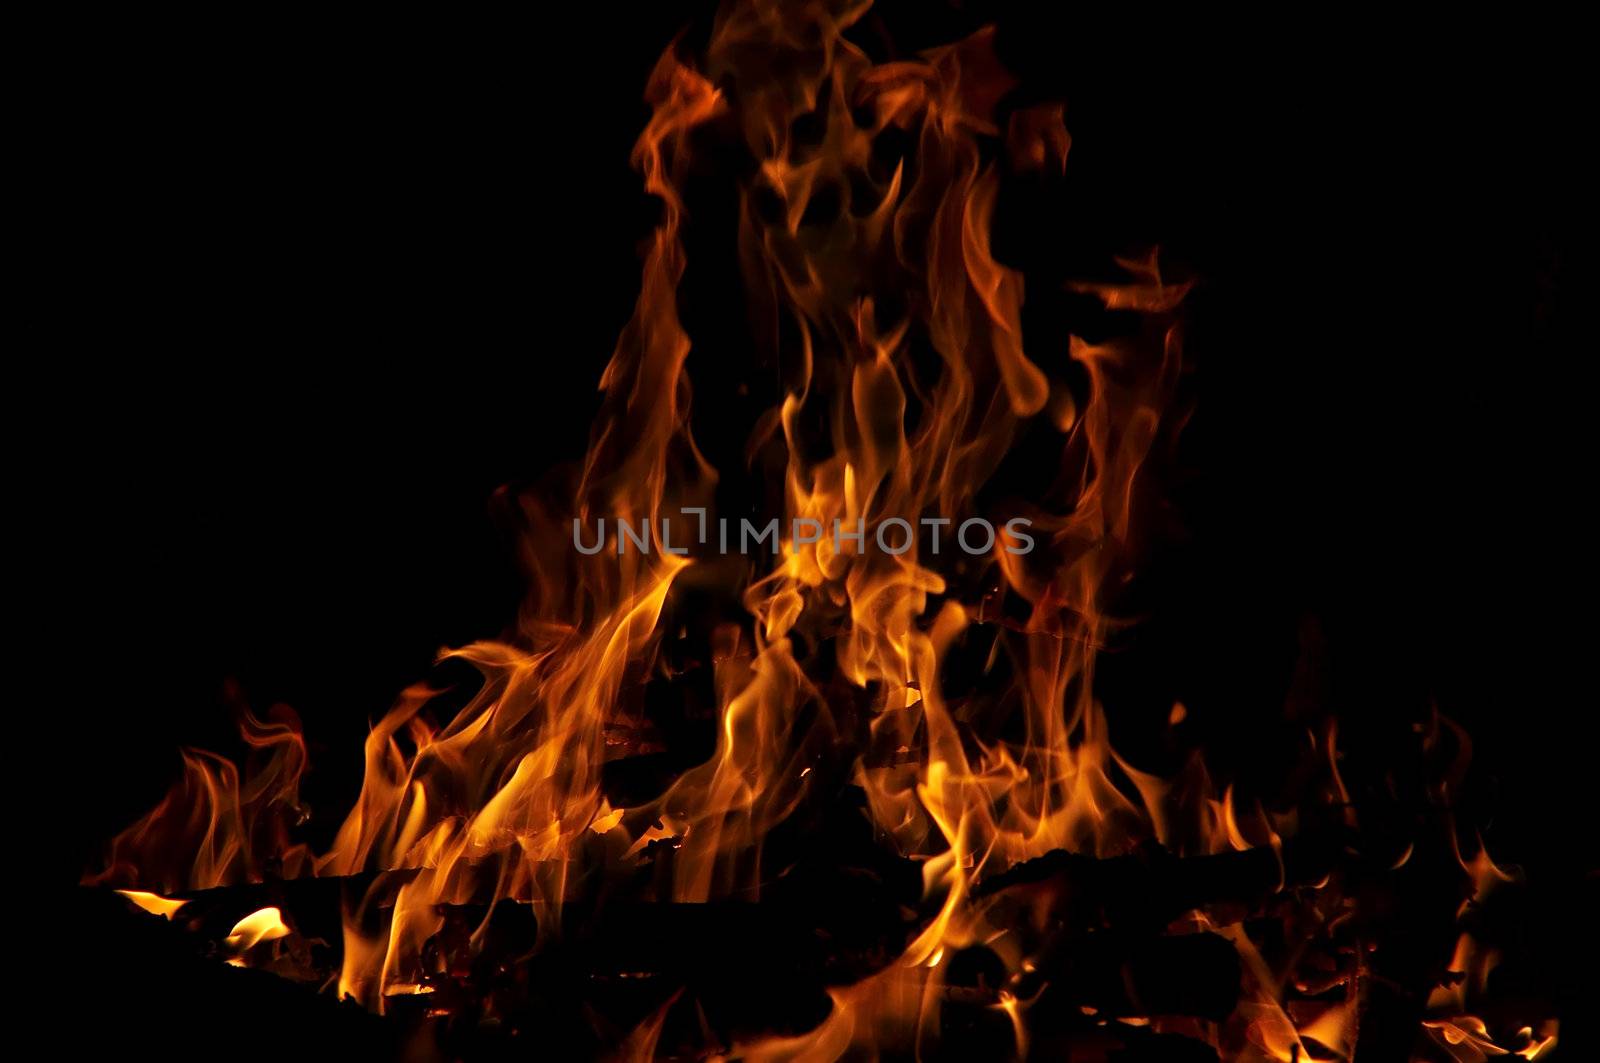 Shot of the fire and flames